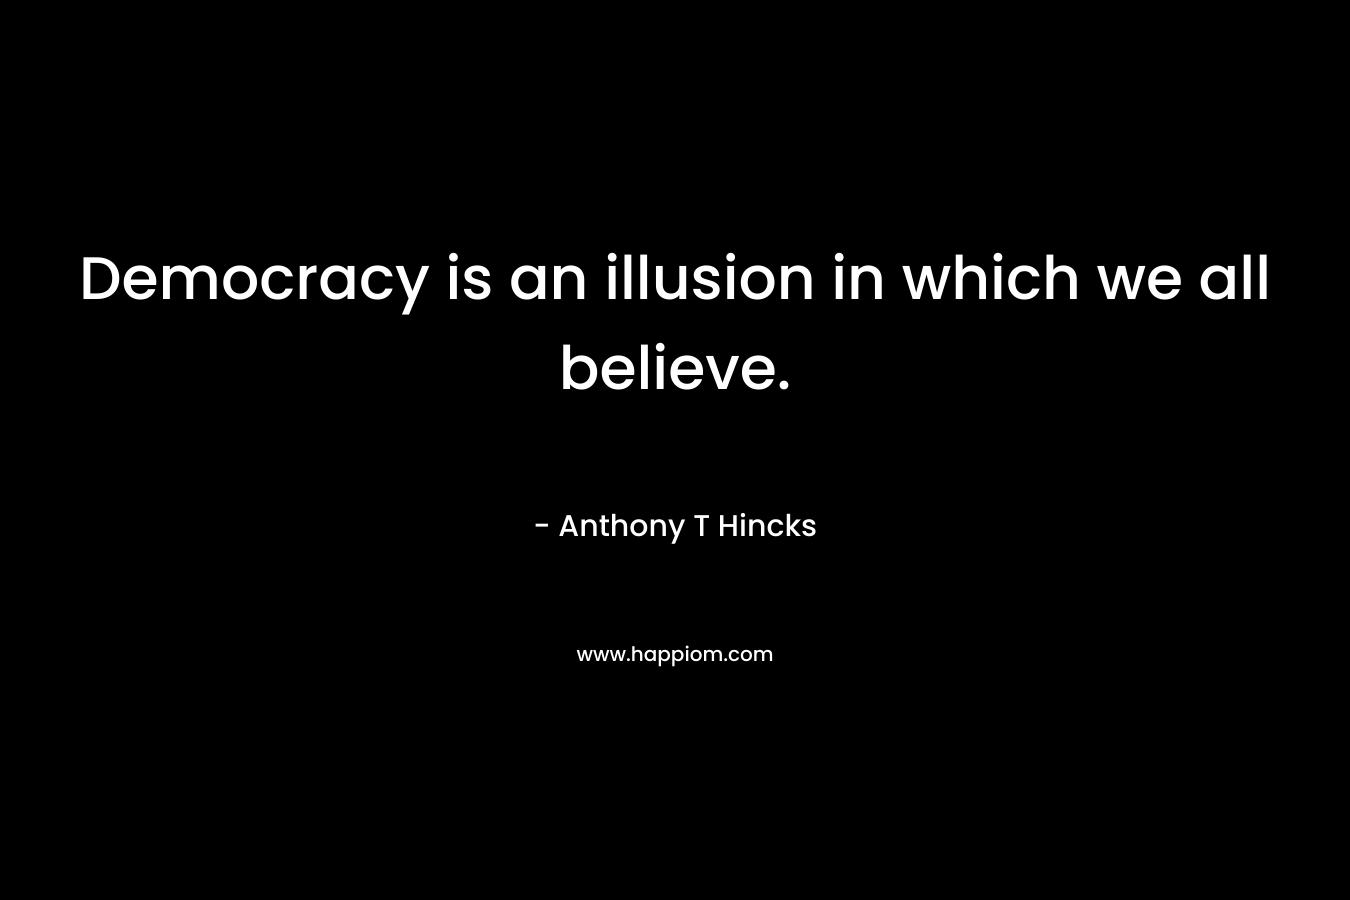 Democracy is an illusion in which we all believe.